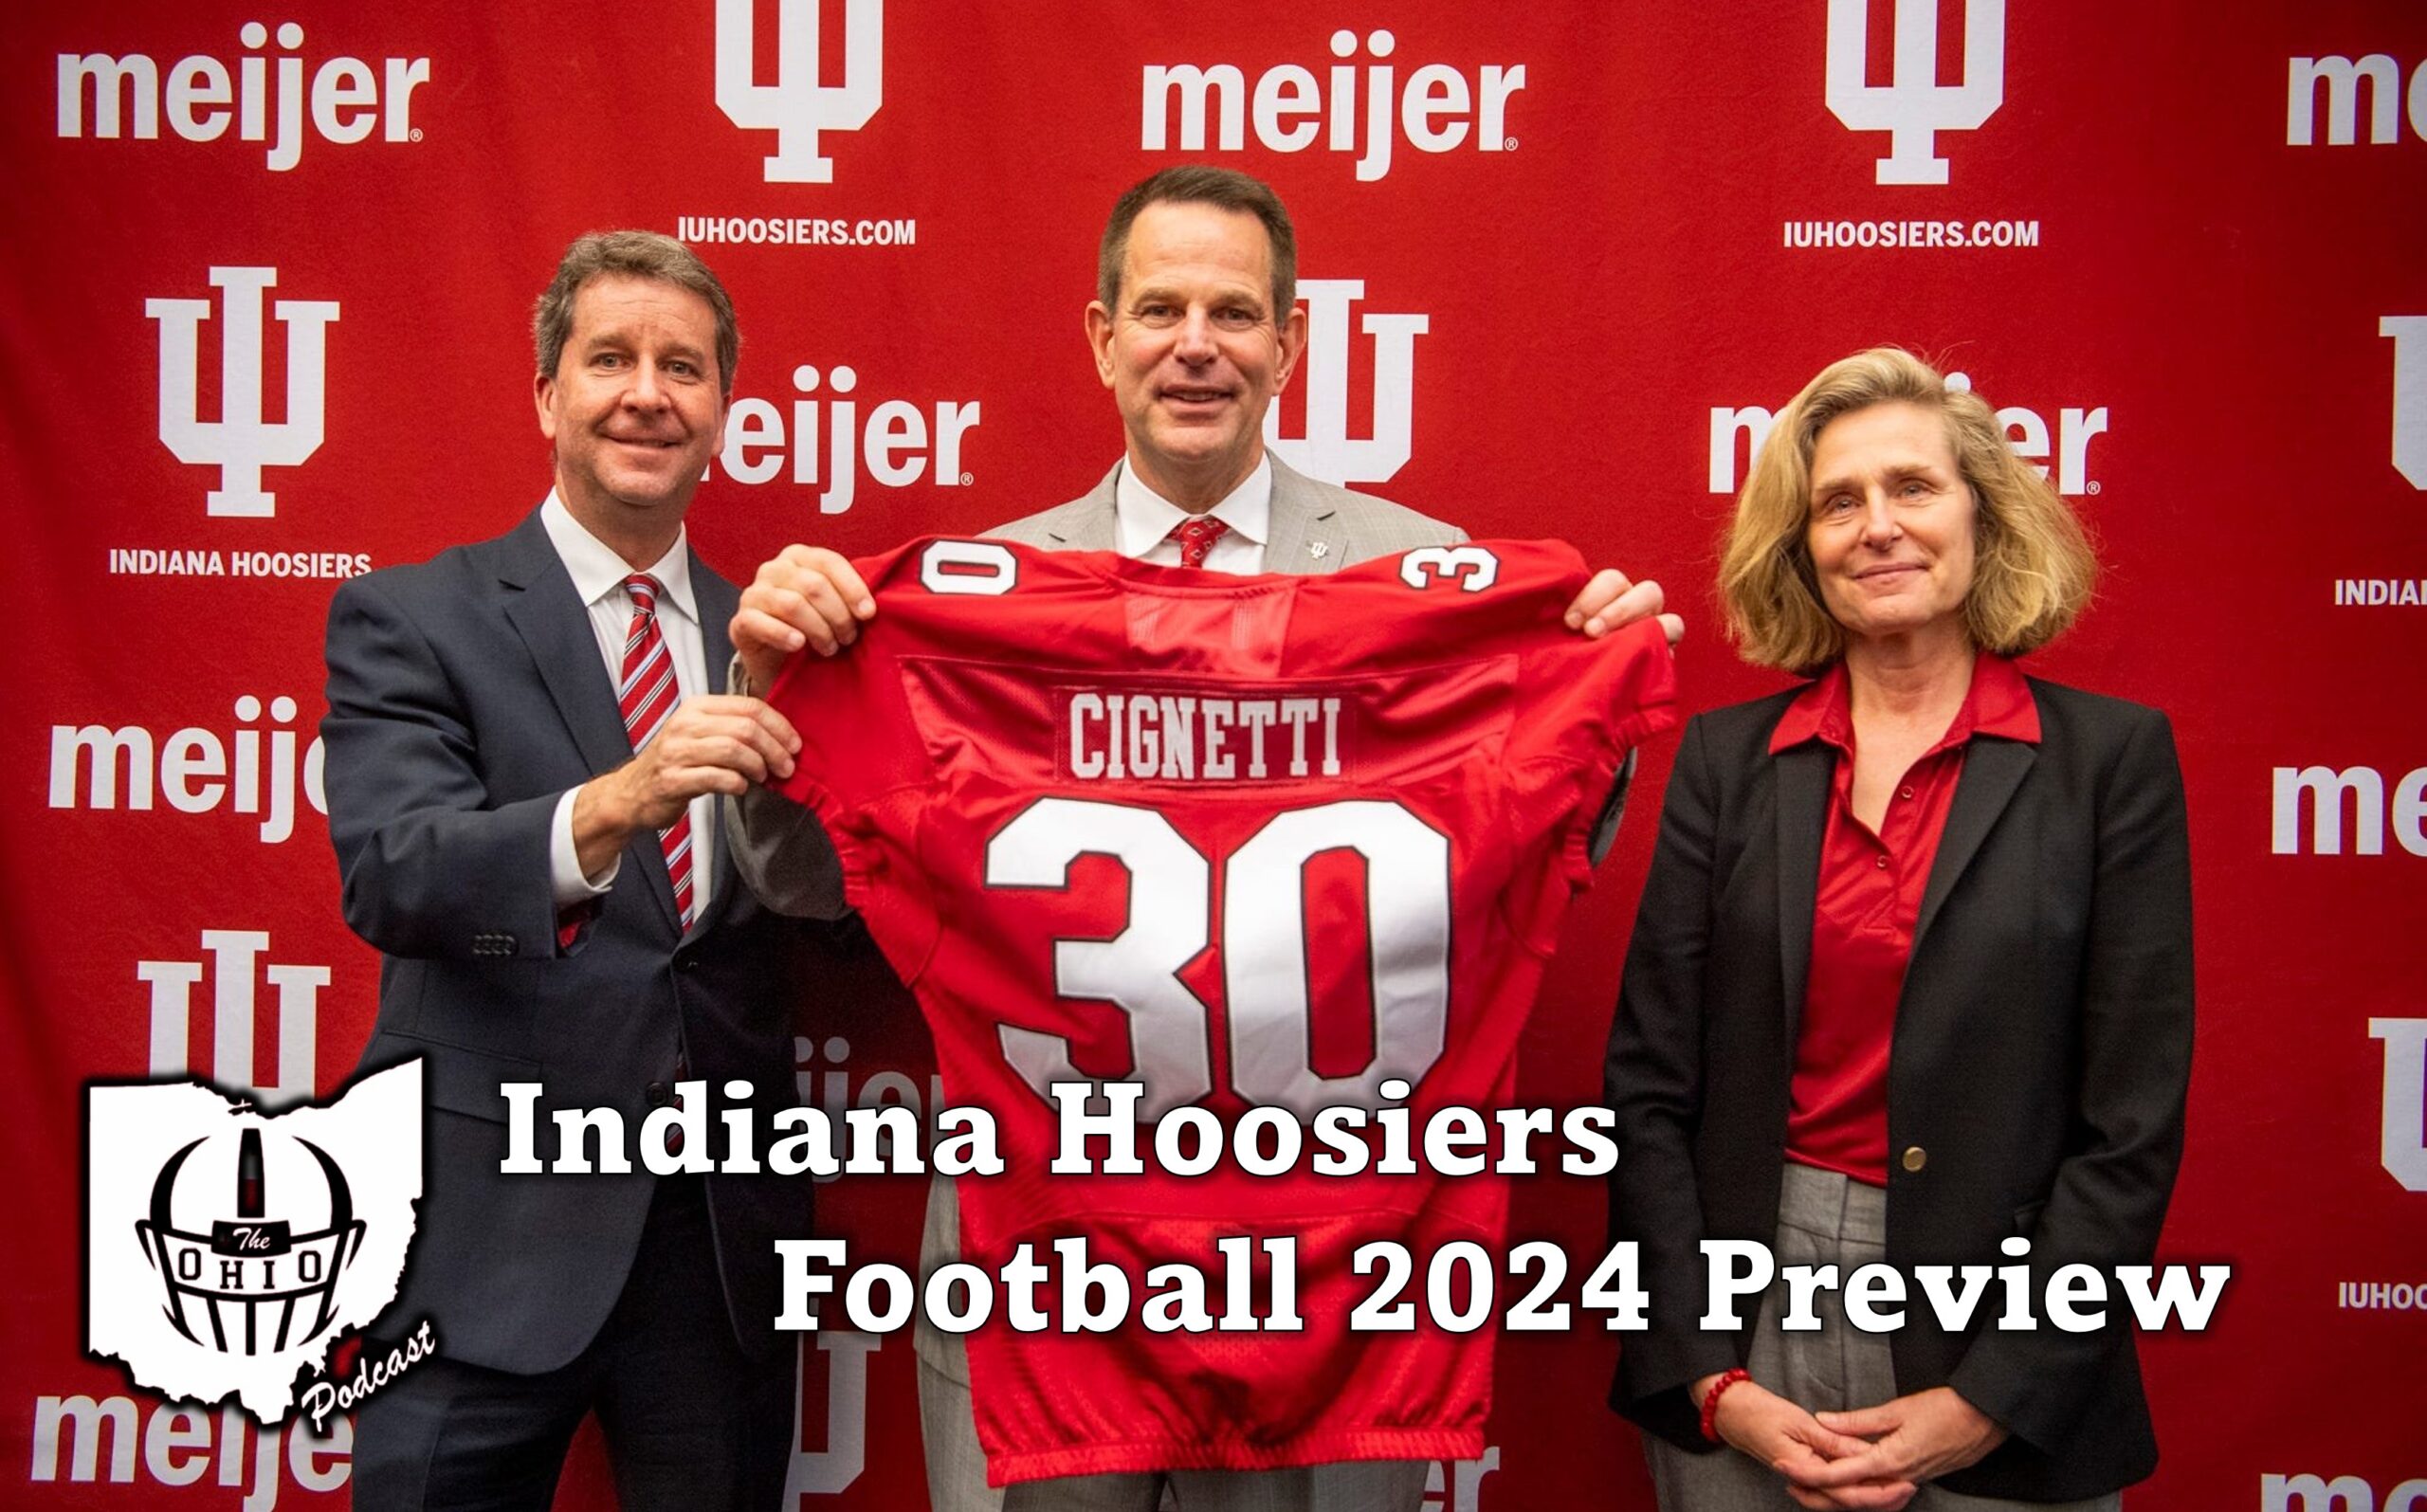 Indiana Hoosiers Football 2024 Preview